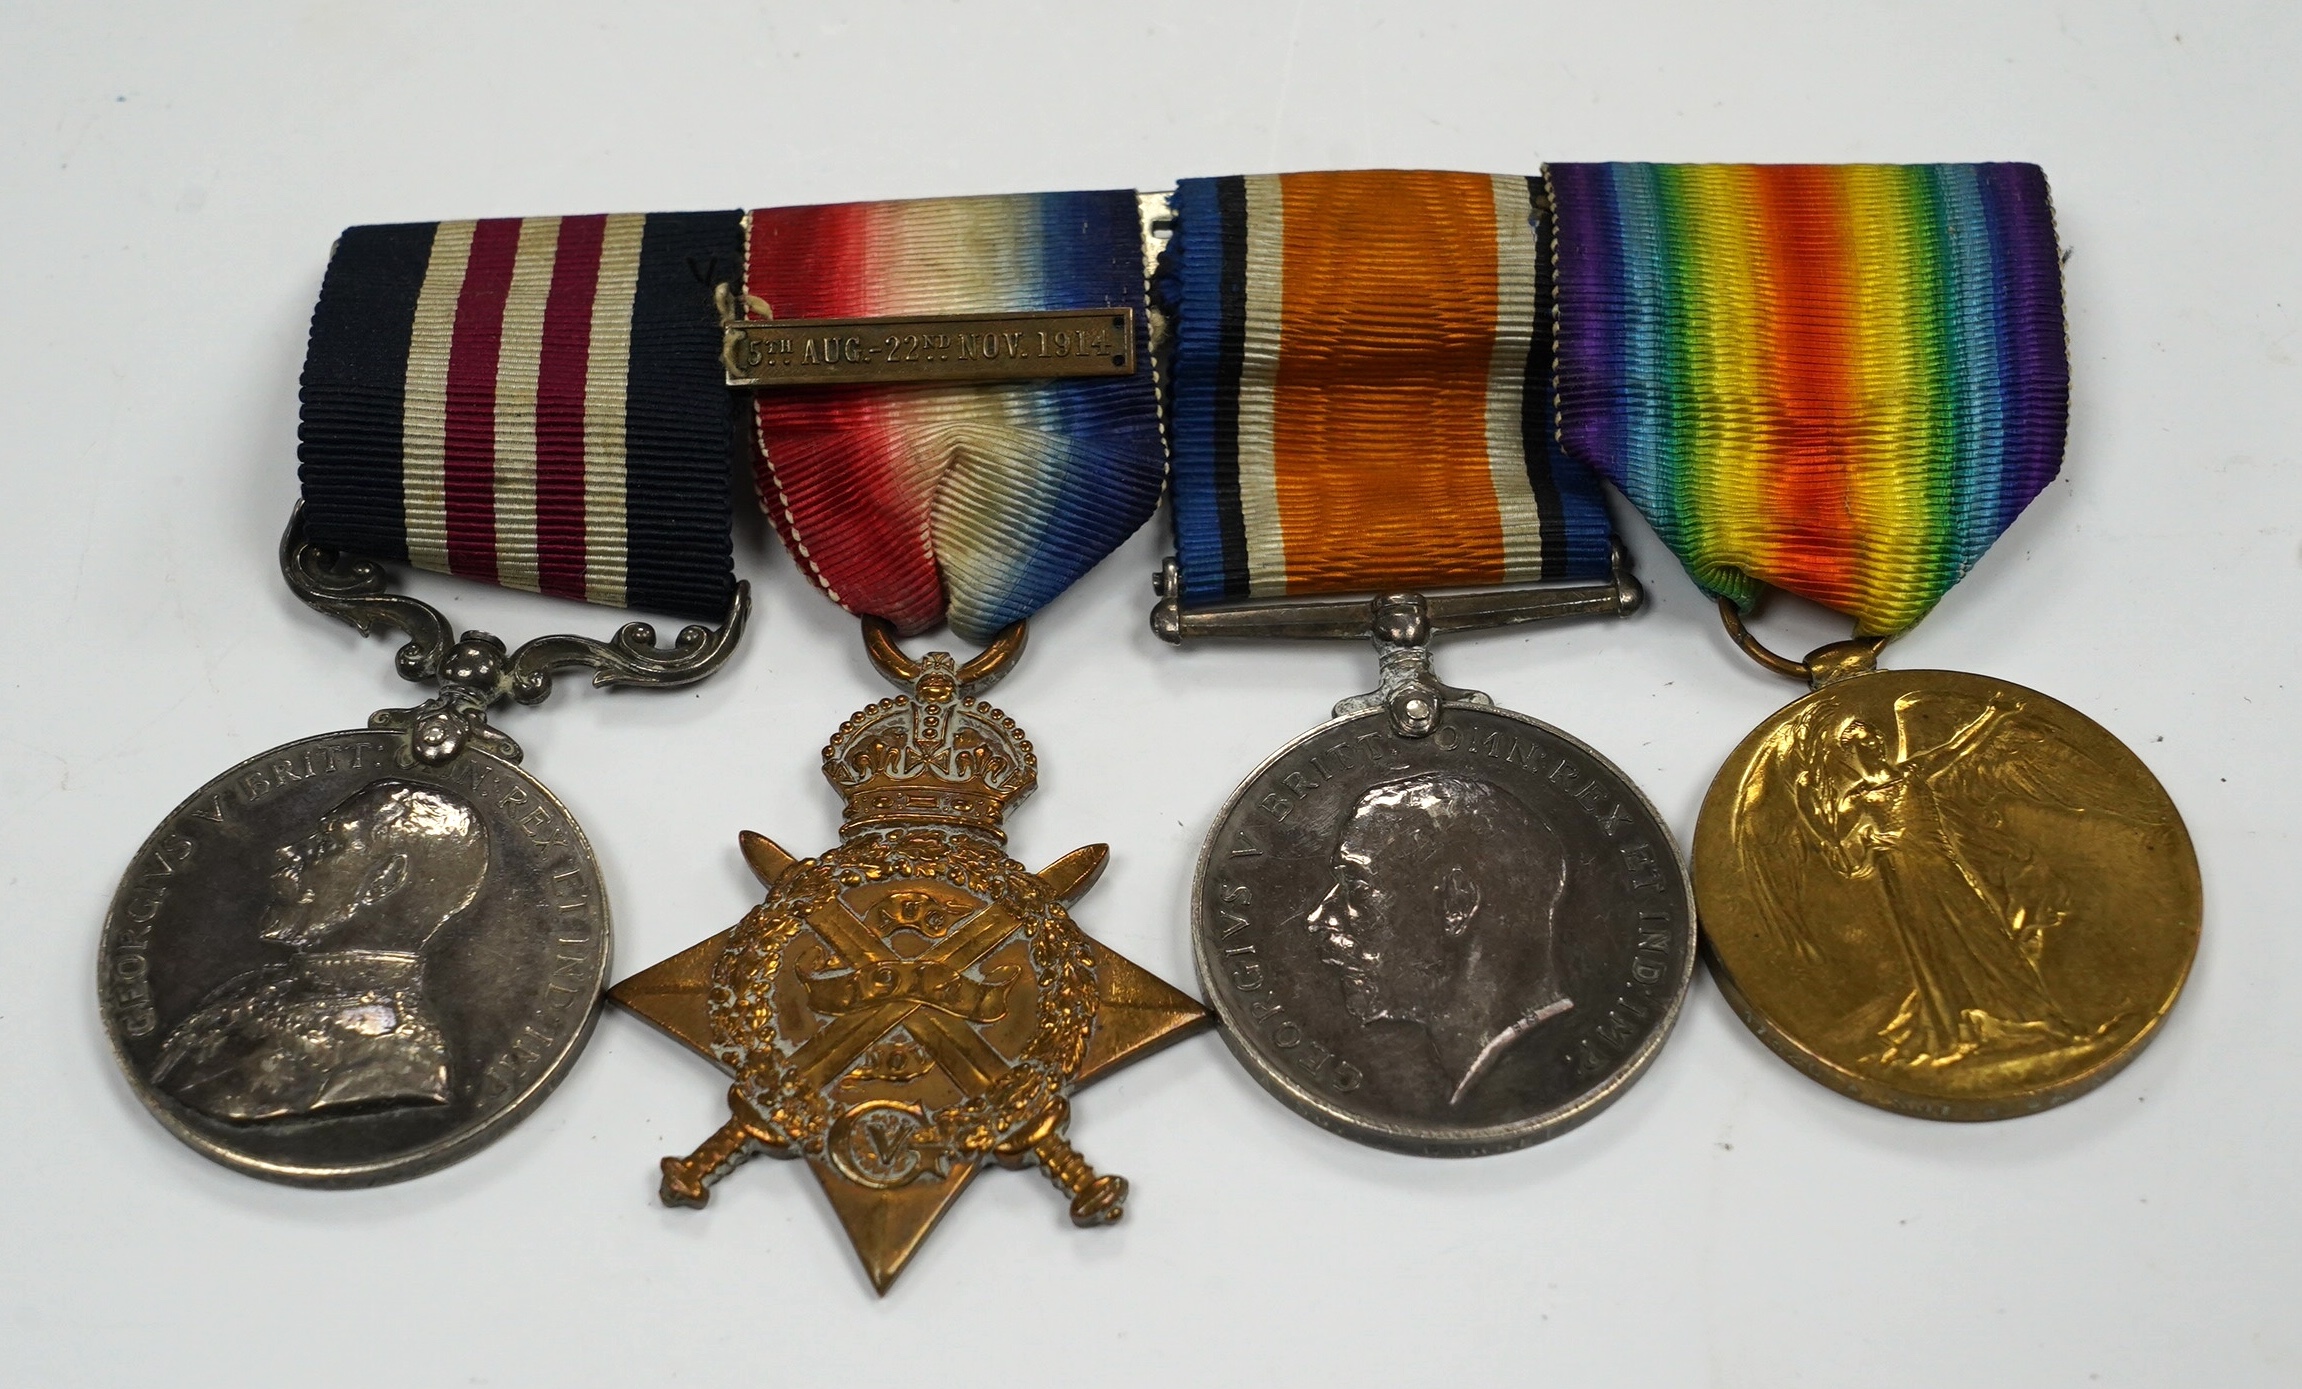 A First World War medal group awarded to Pte. W. Garnett R.A.M.C. comprising; a Military Medal for Bravery, a 1914 Star with a bar for 5th Aug. - 22nd Nov. 1914, a British War Medal and a Victory Medal, mounted together